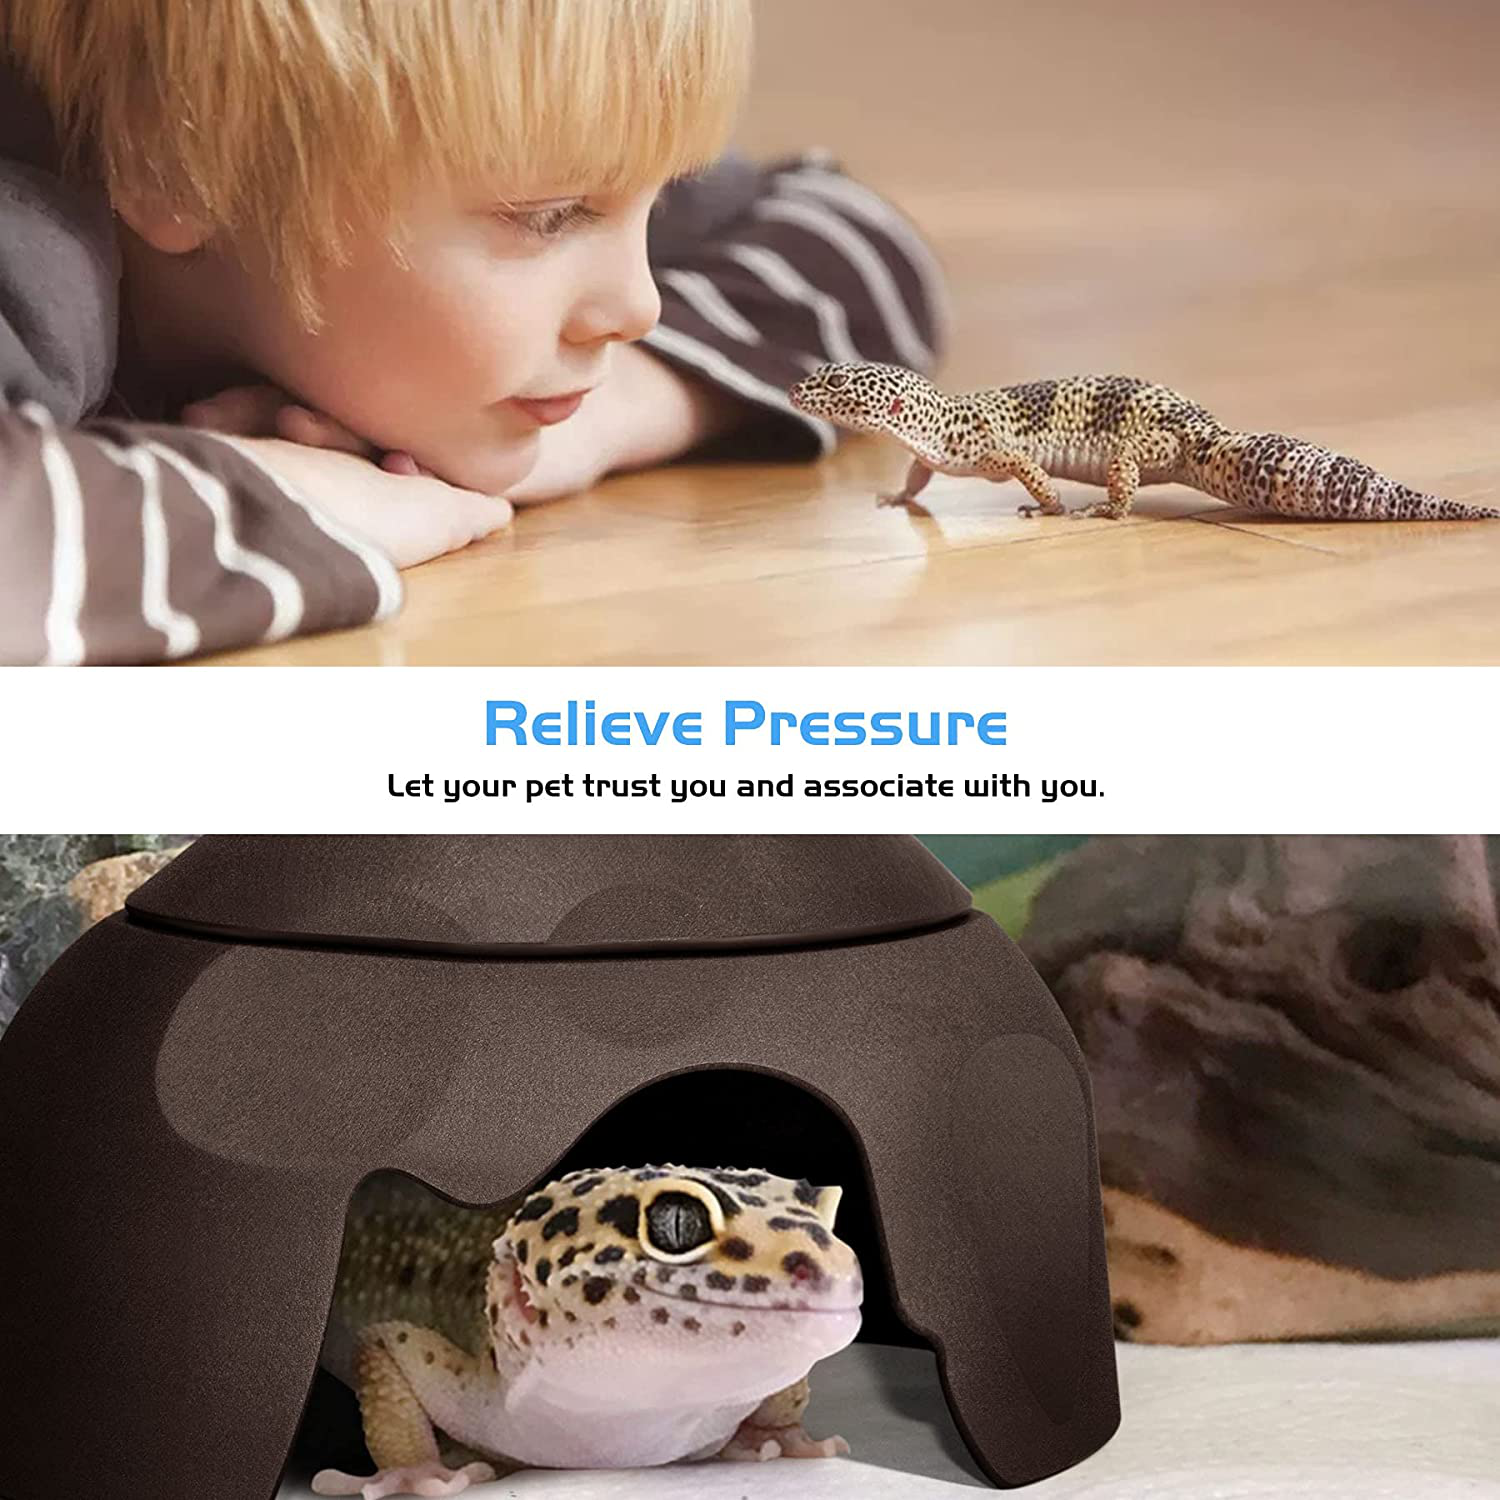 Fischuel Reptile Hides Humidification Cave Help Your Pets Shedding, a Damp Hideout with Natural Rock Designto, Suitable for Bearded Dragons Lizards Leopard Gecko Spiders Turtles and Snakes